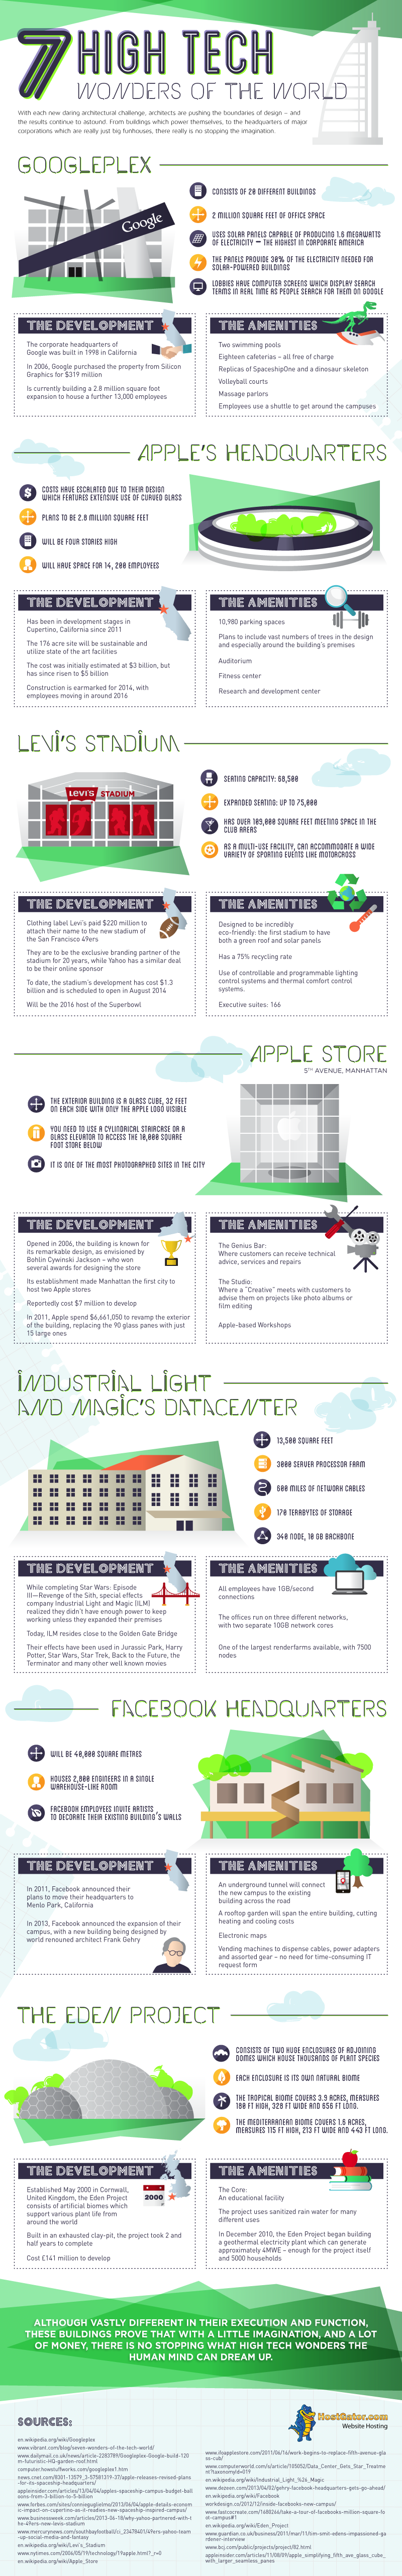 Infographic: 7 High Tech Wonders of the World